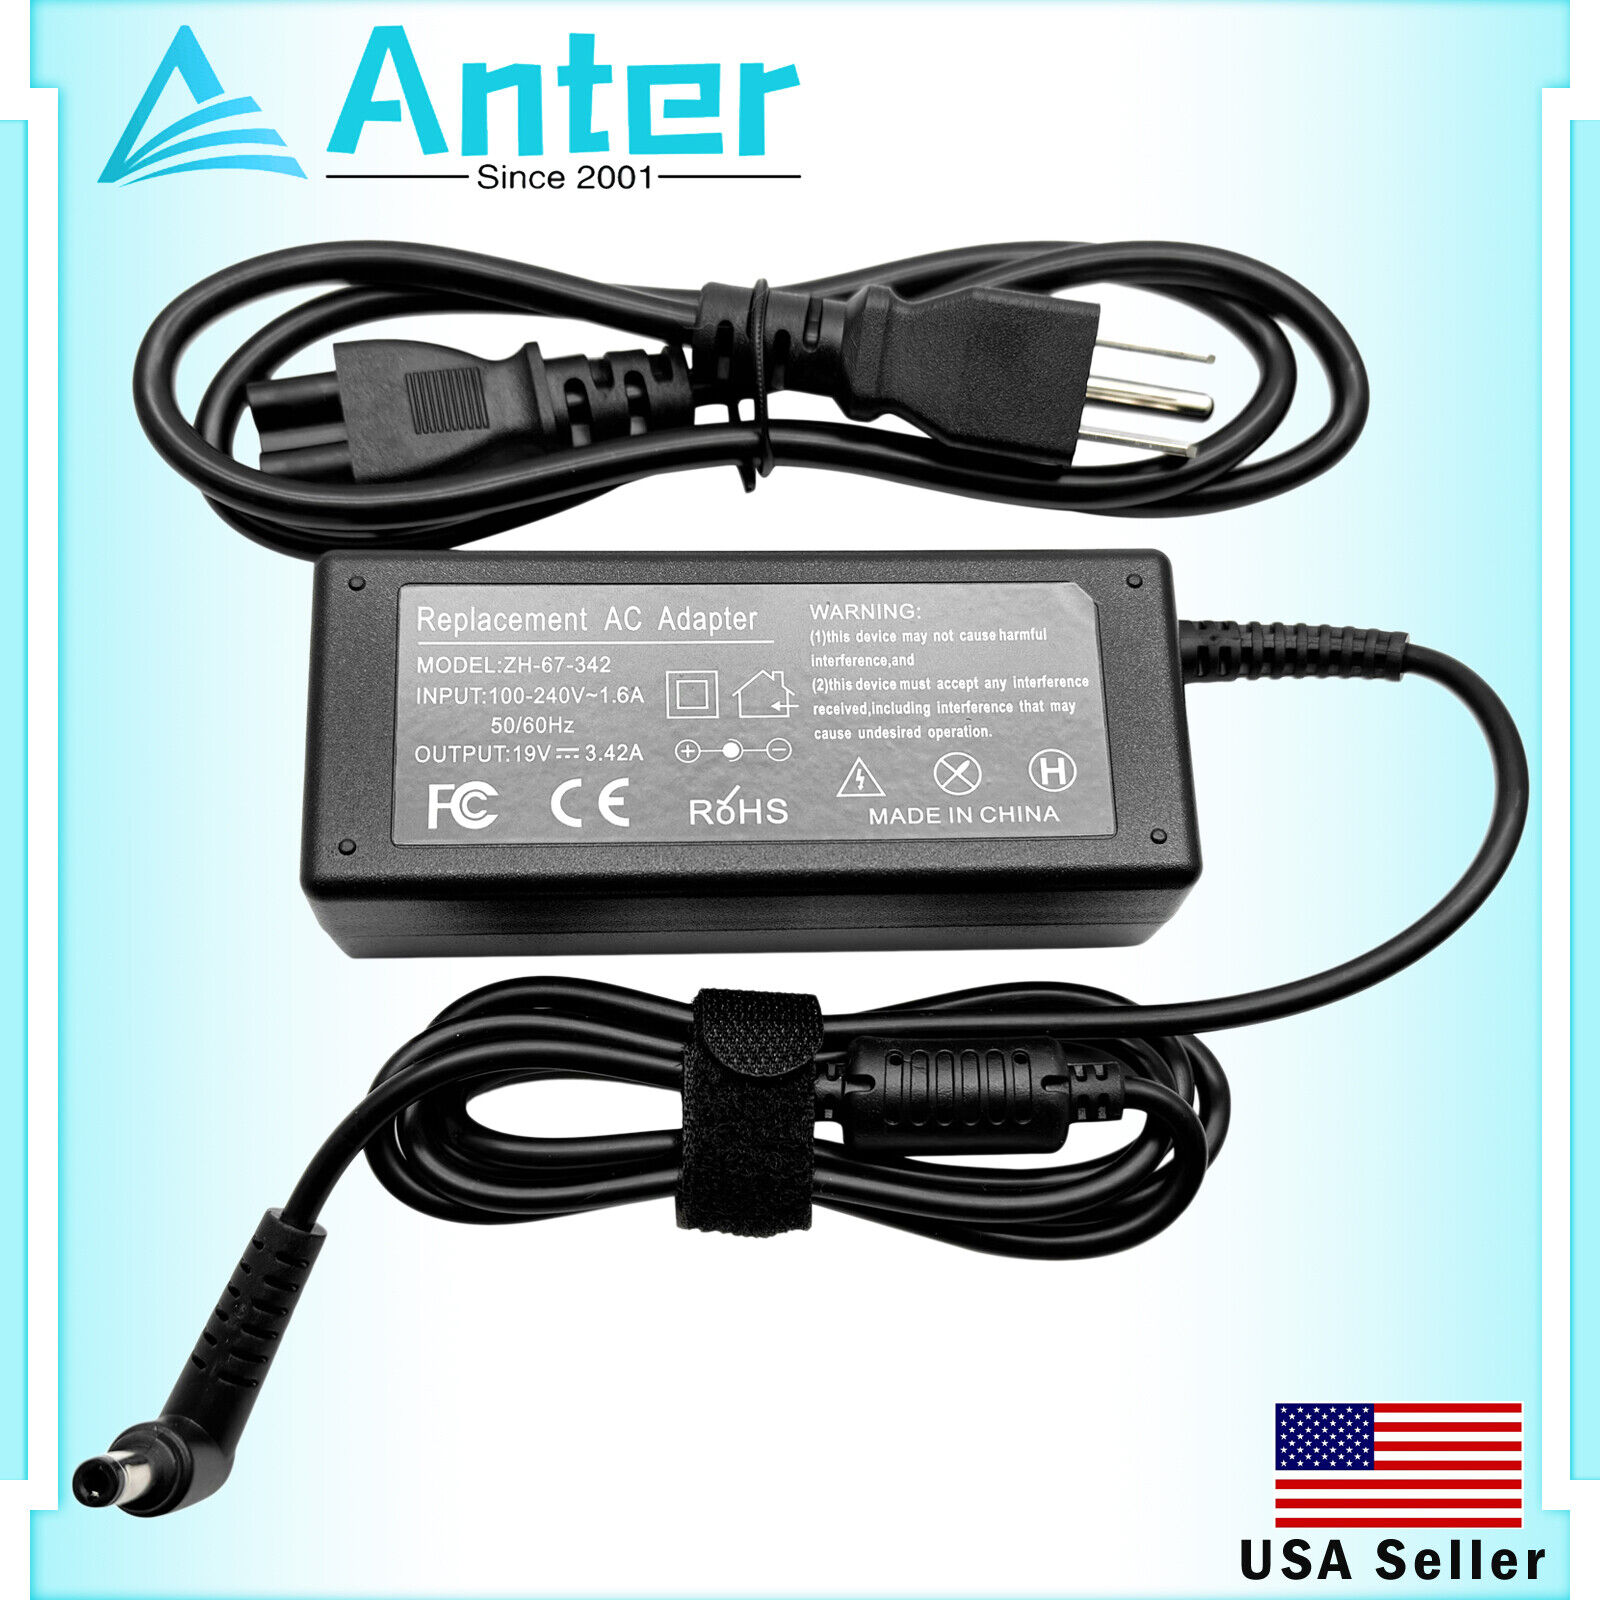 AC Adapter Power Charger Cord For HP Pavilion 23CW 25CW 27cw 23tm 22cwa Monitor